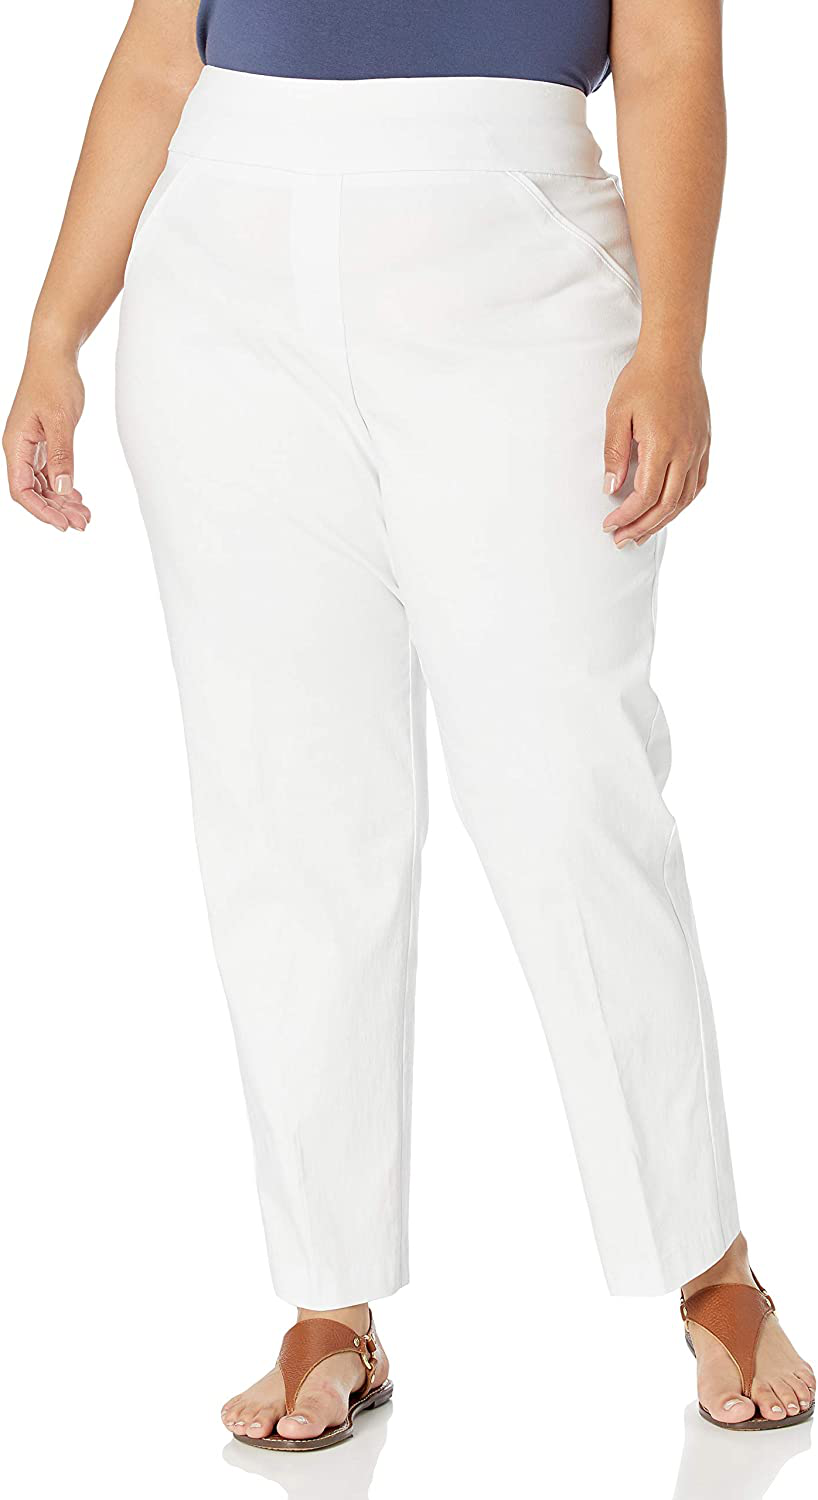 Alfred Dunner Women's Classic Fit Medium Length Pant